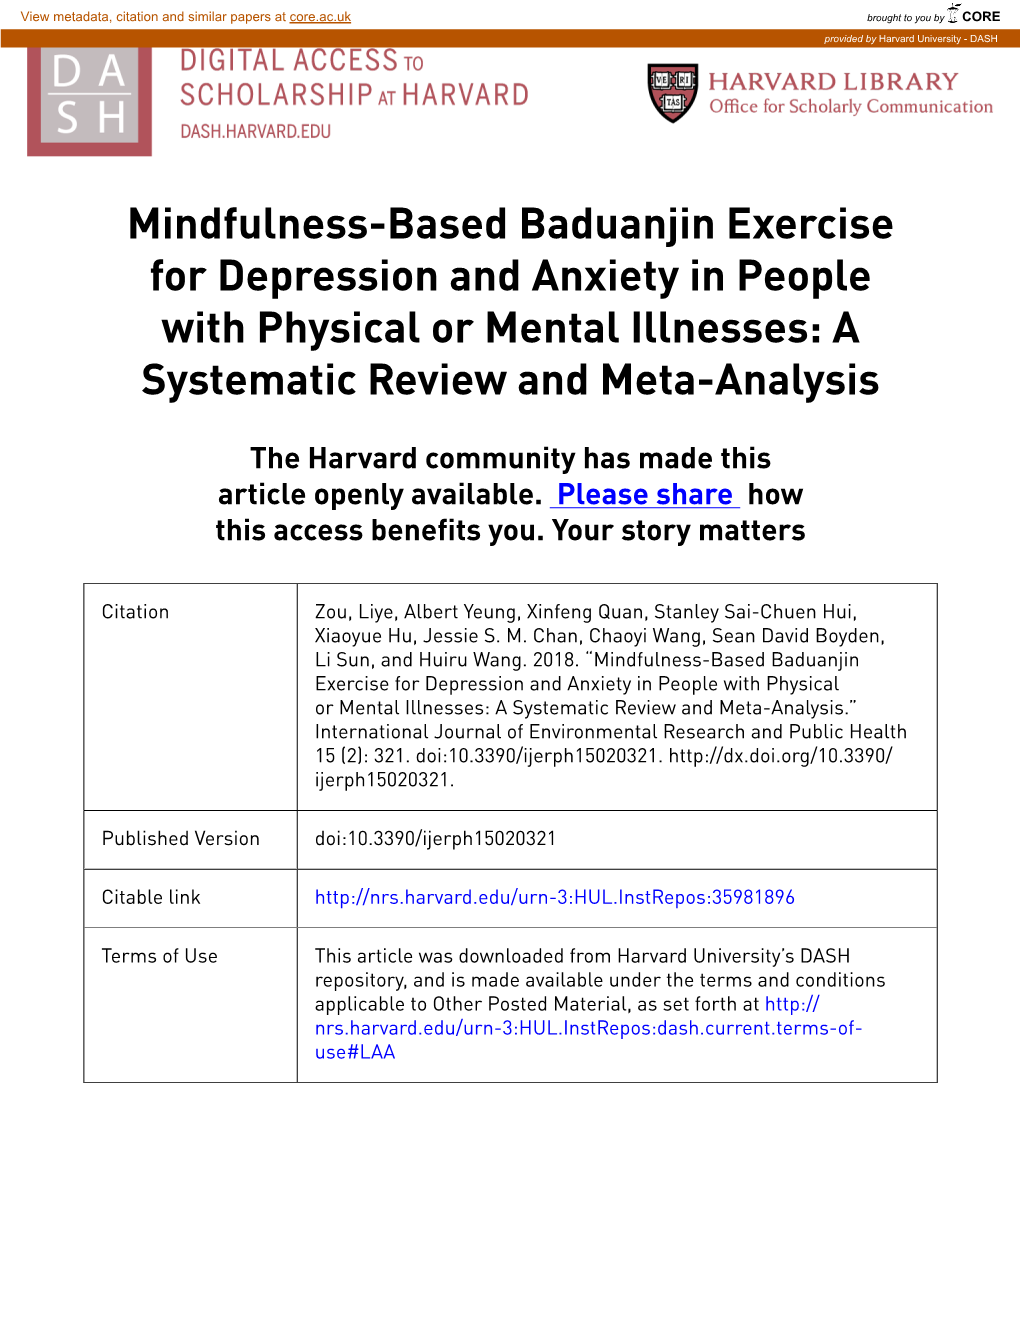 Mindfulness-Based Baduanjin Exercise for Depression and Anxiety in People with Physical Or Mental Illnesses: a Systematic Review and Meta-Analysis